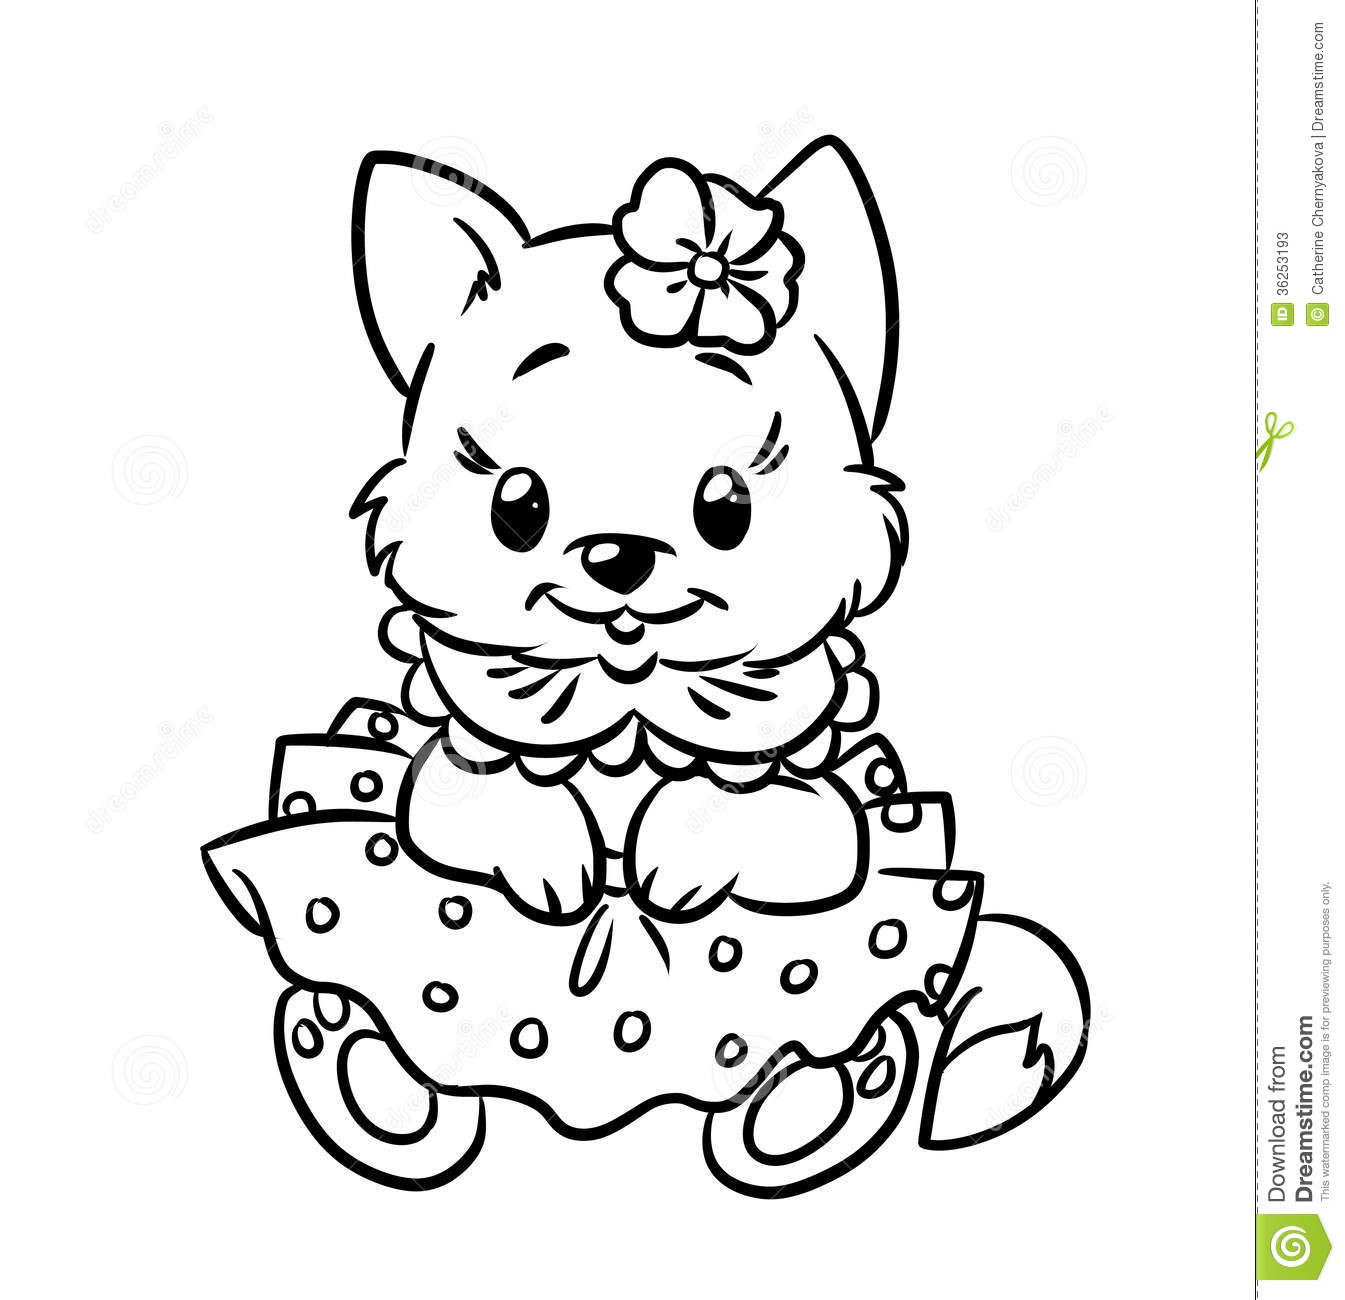 Baby Kitten Coloring Pages
 Baby kitten coloring pages stock illustration